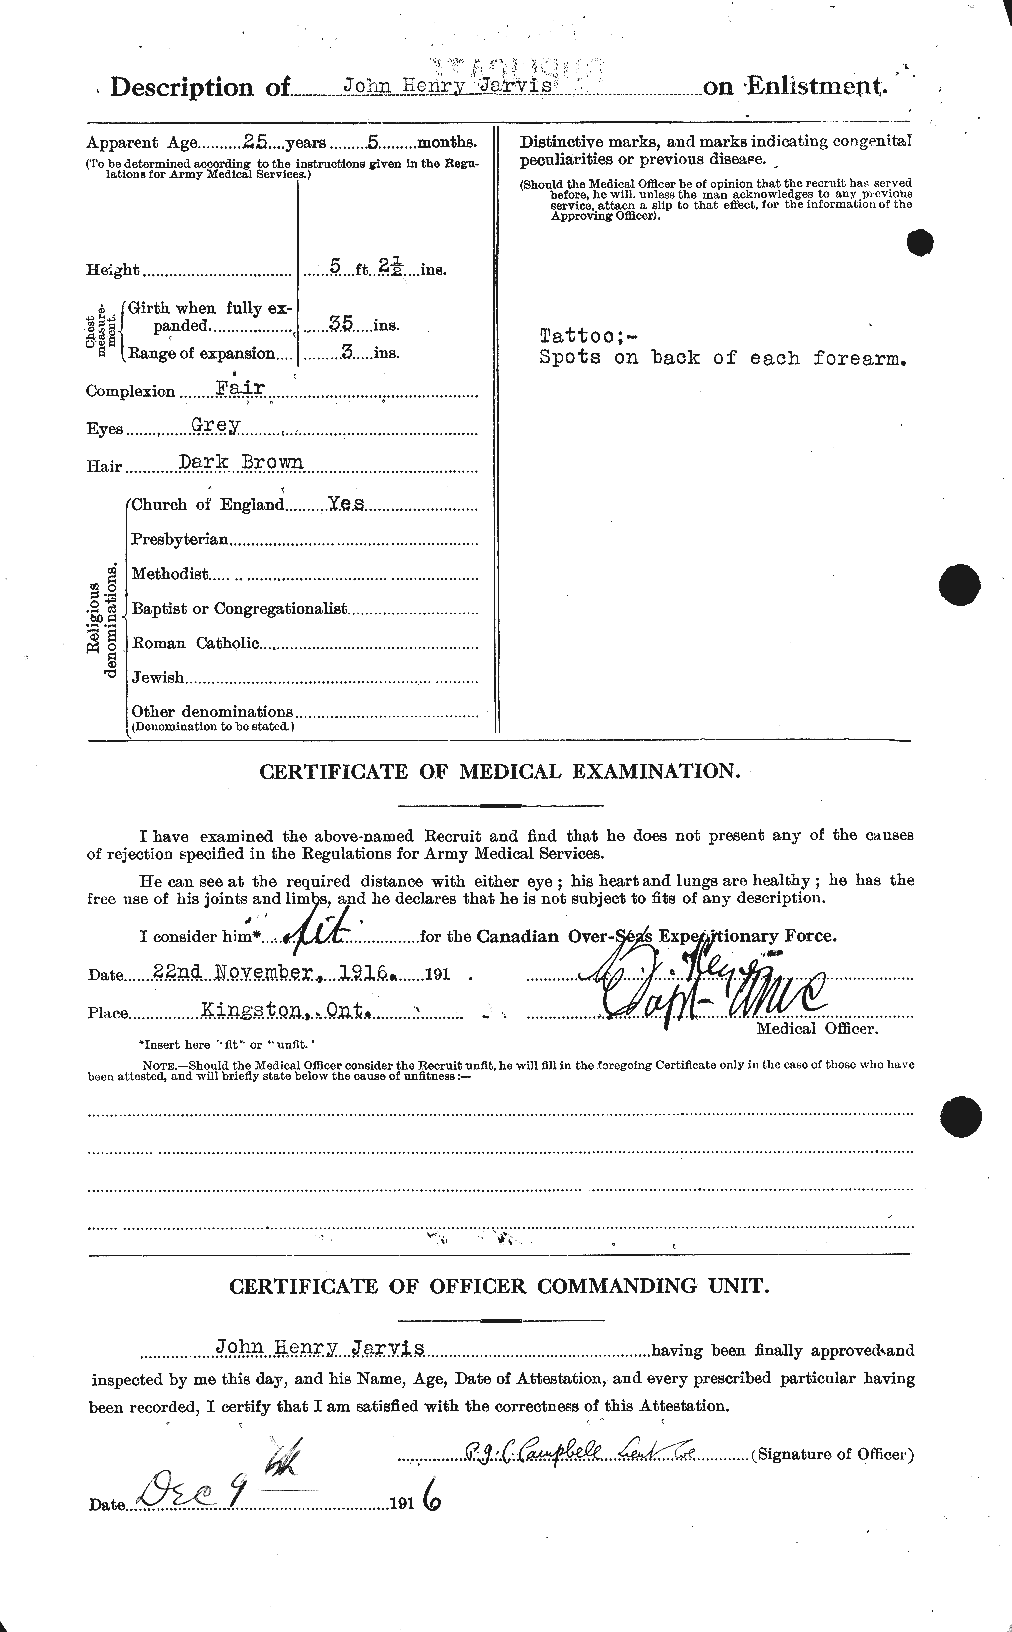 Personnel Records of the First World War - CEF 414761b